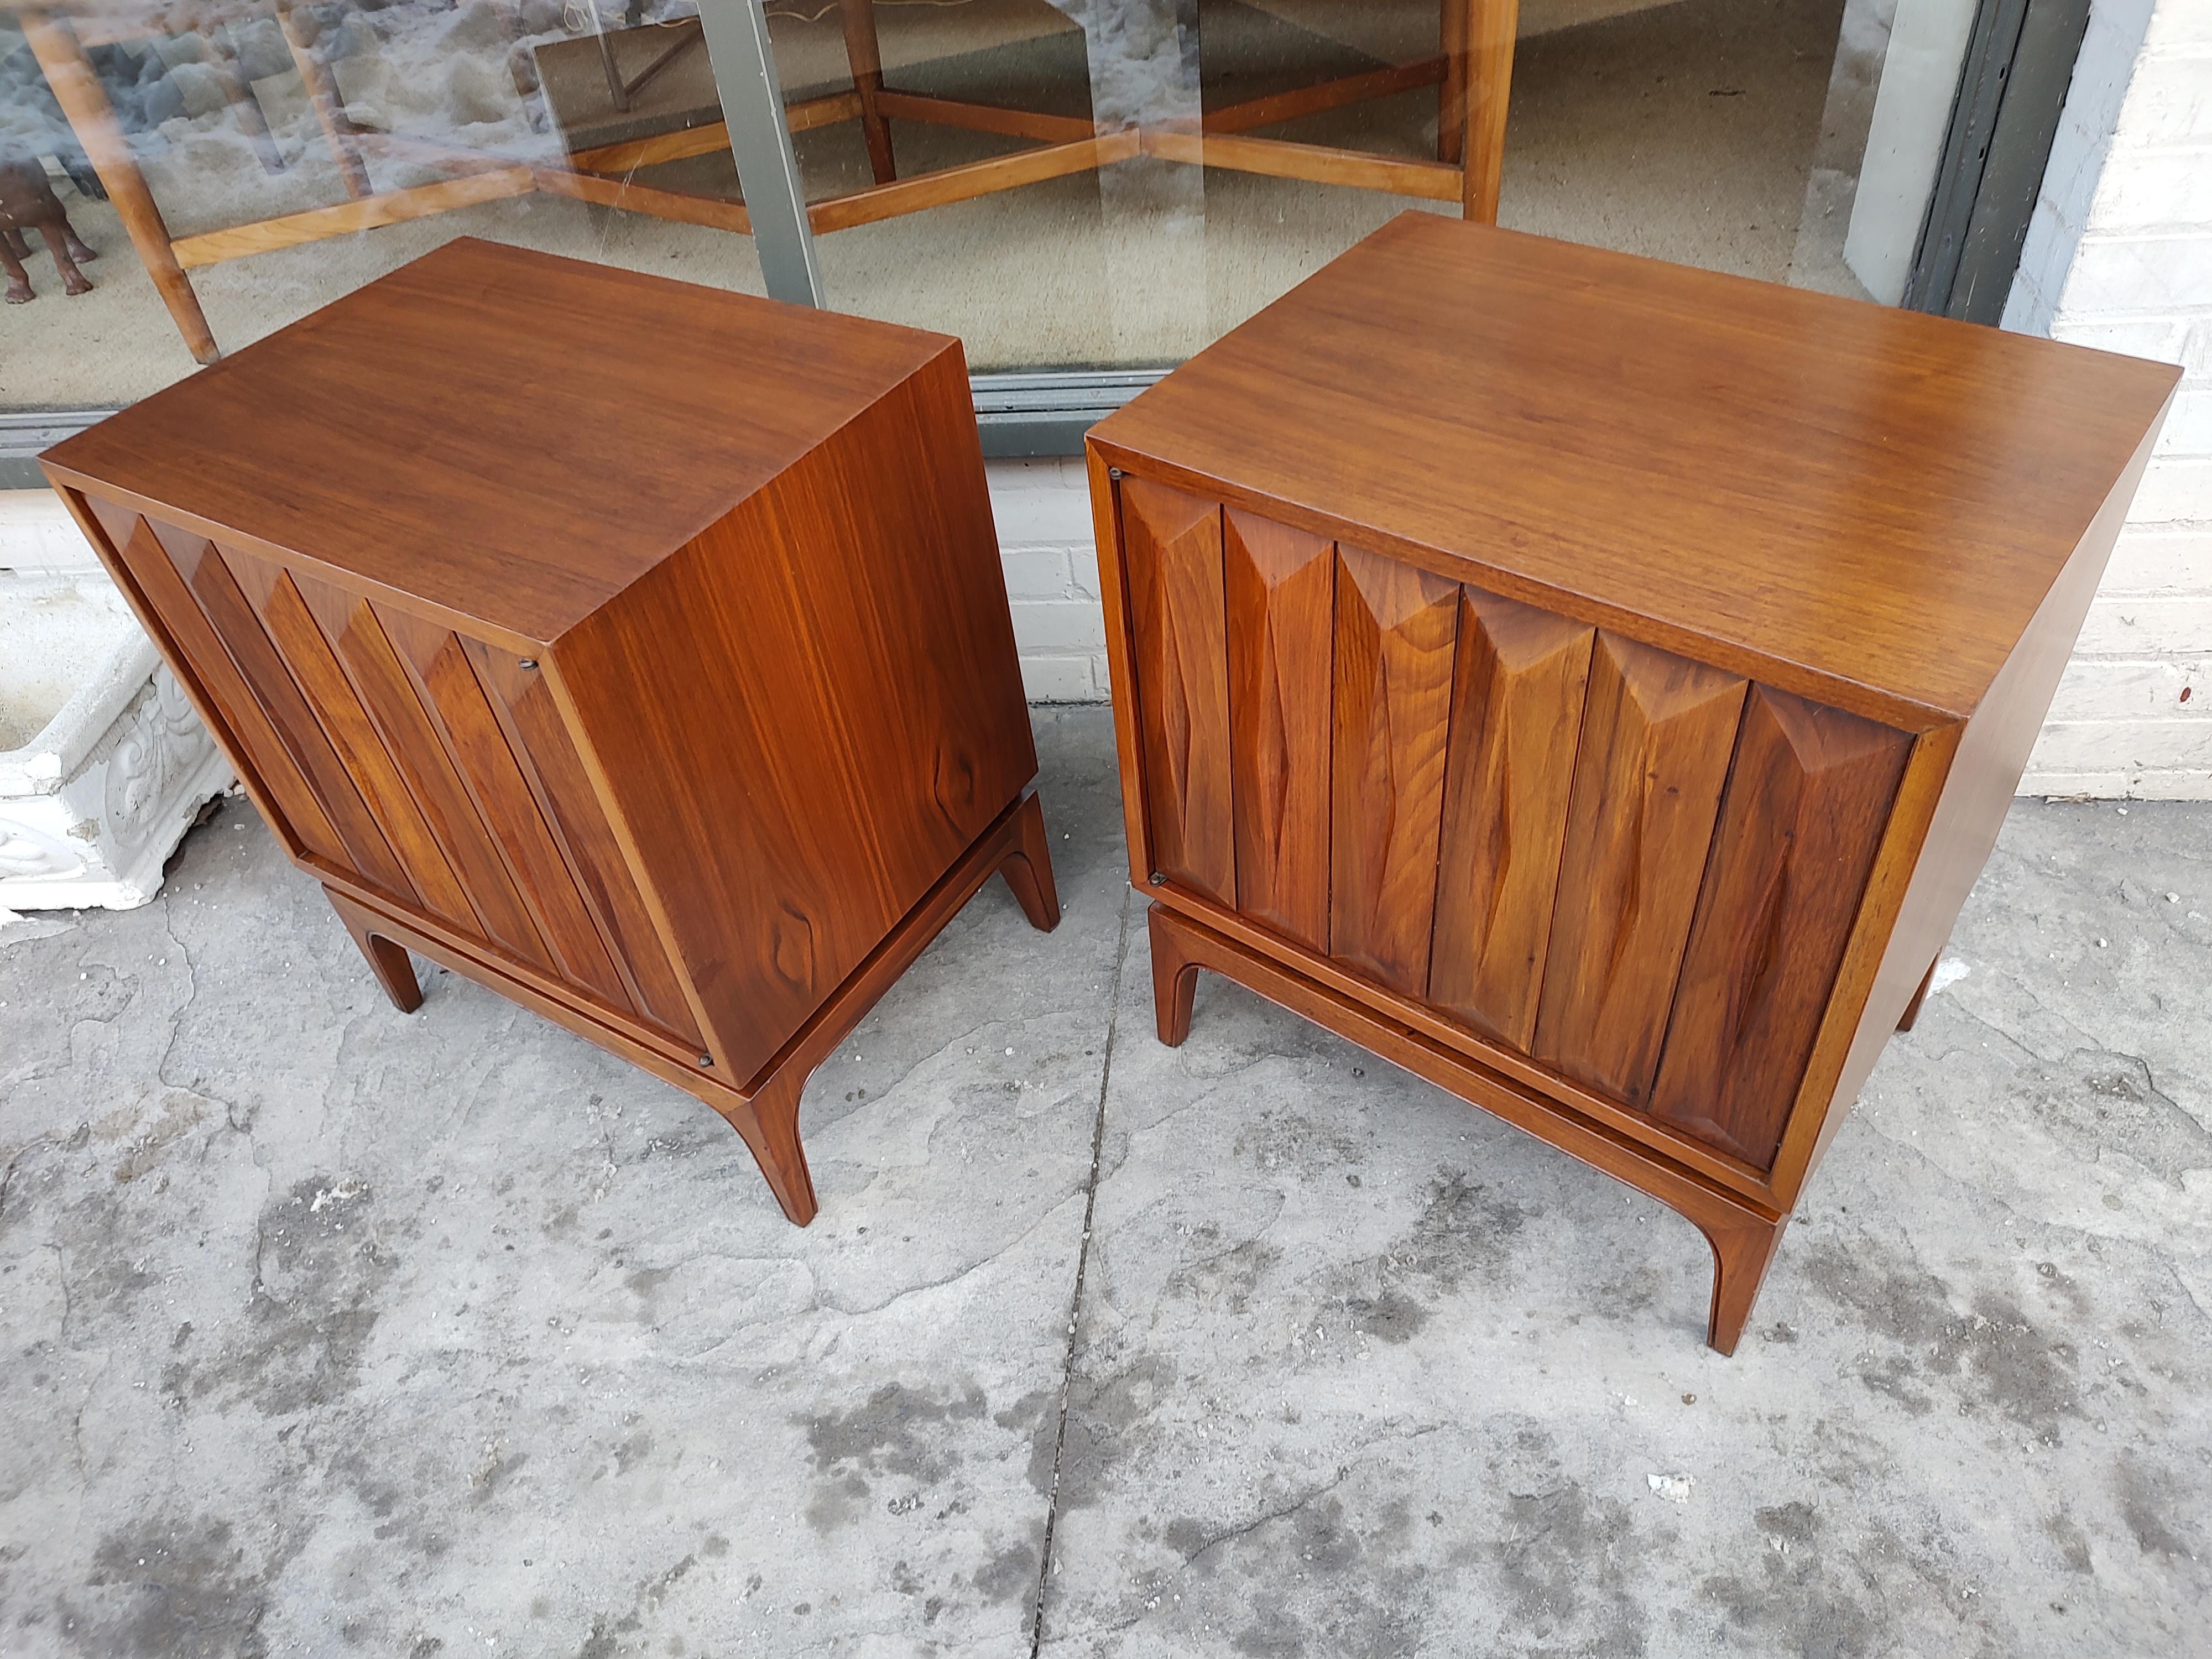 Fabulous pair of walnut diamond faceted nightstands by Albert Parvin. Push button door opens to reveal one Shelf in both cabinets. They were recently refinished and look great. Walnut is exceptional and are tight and structurally sound.